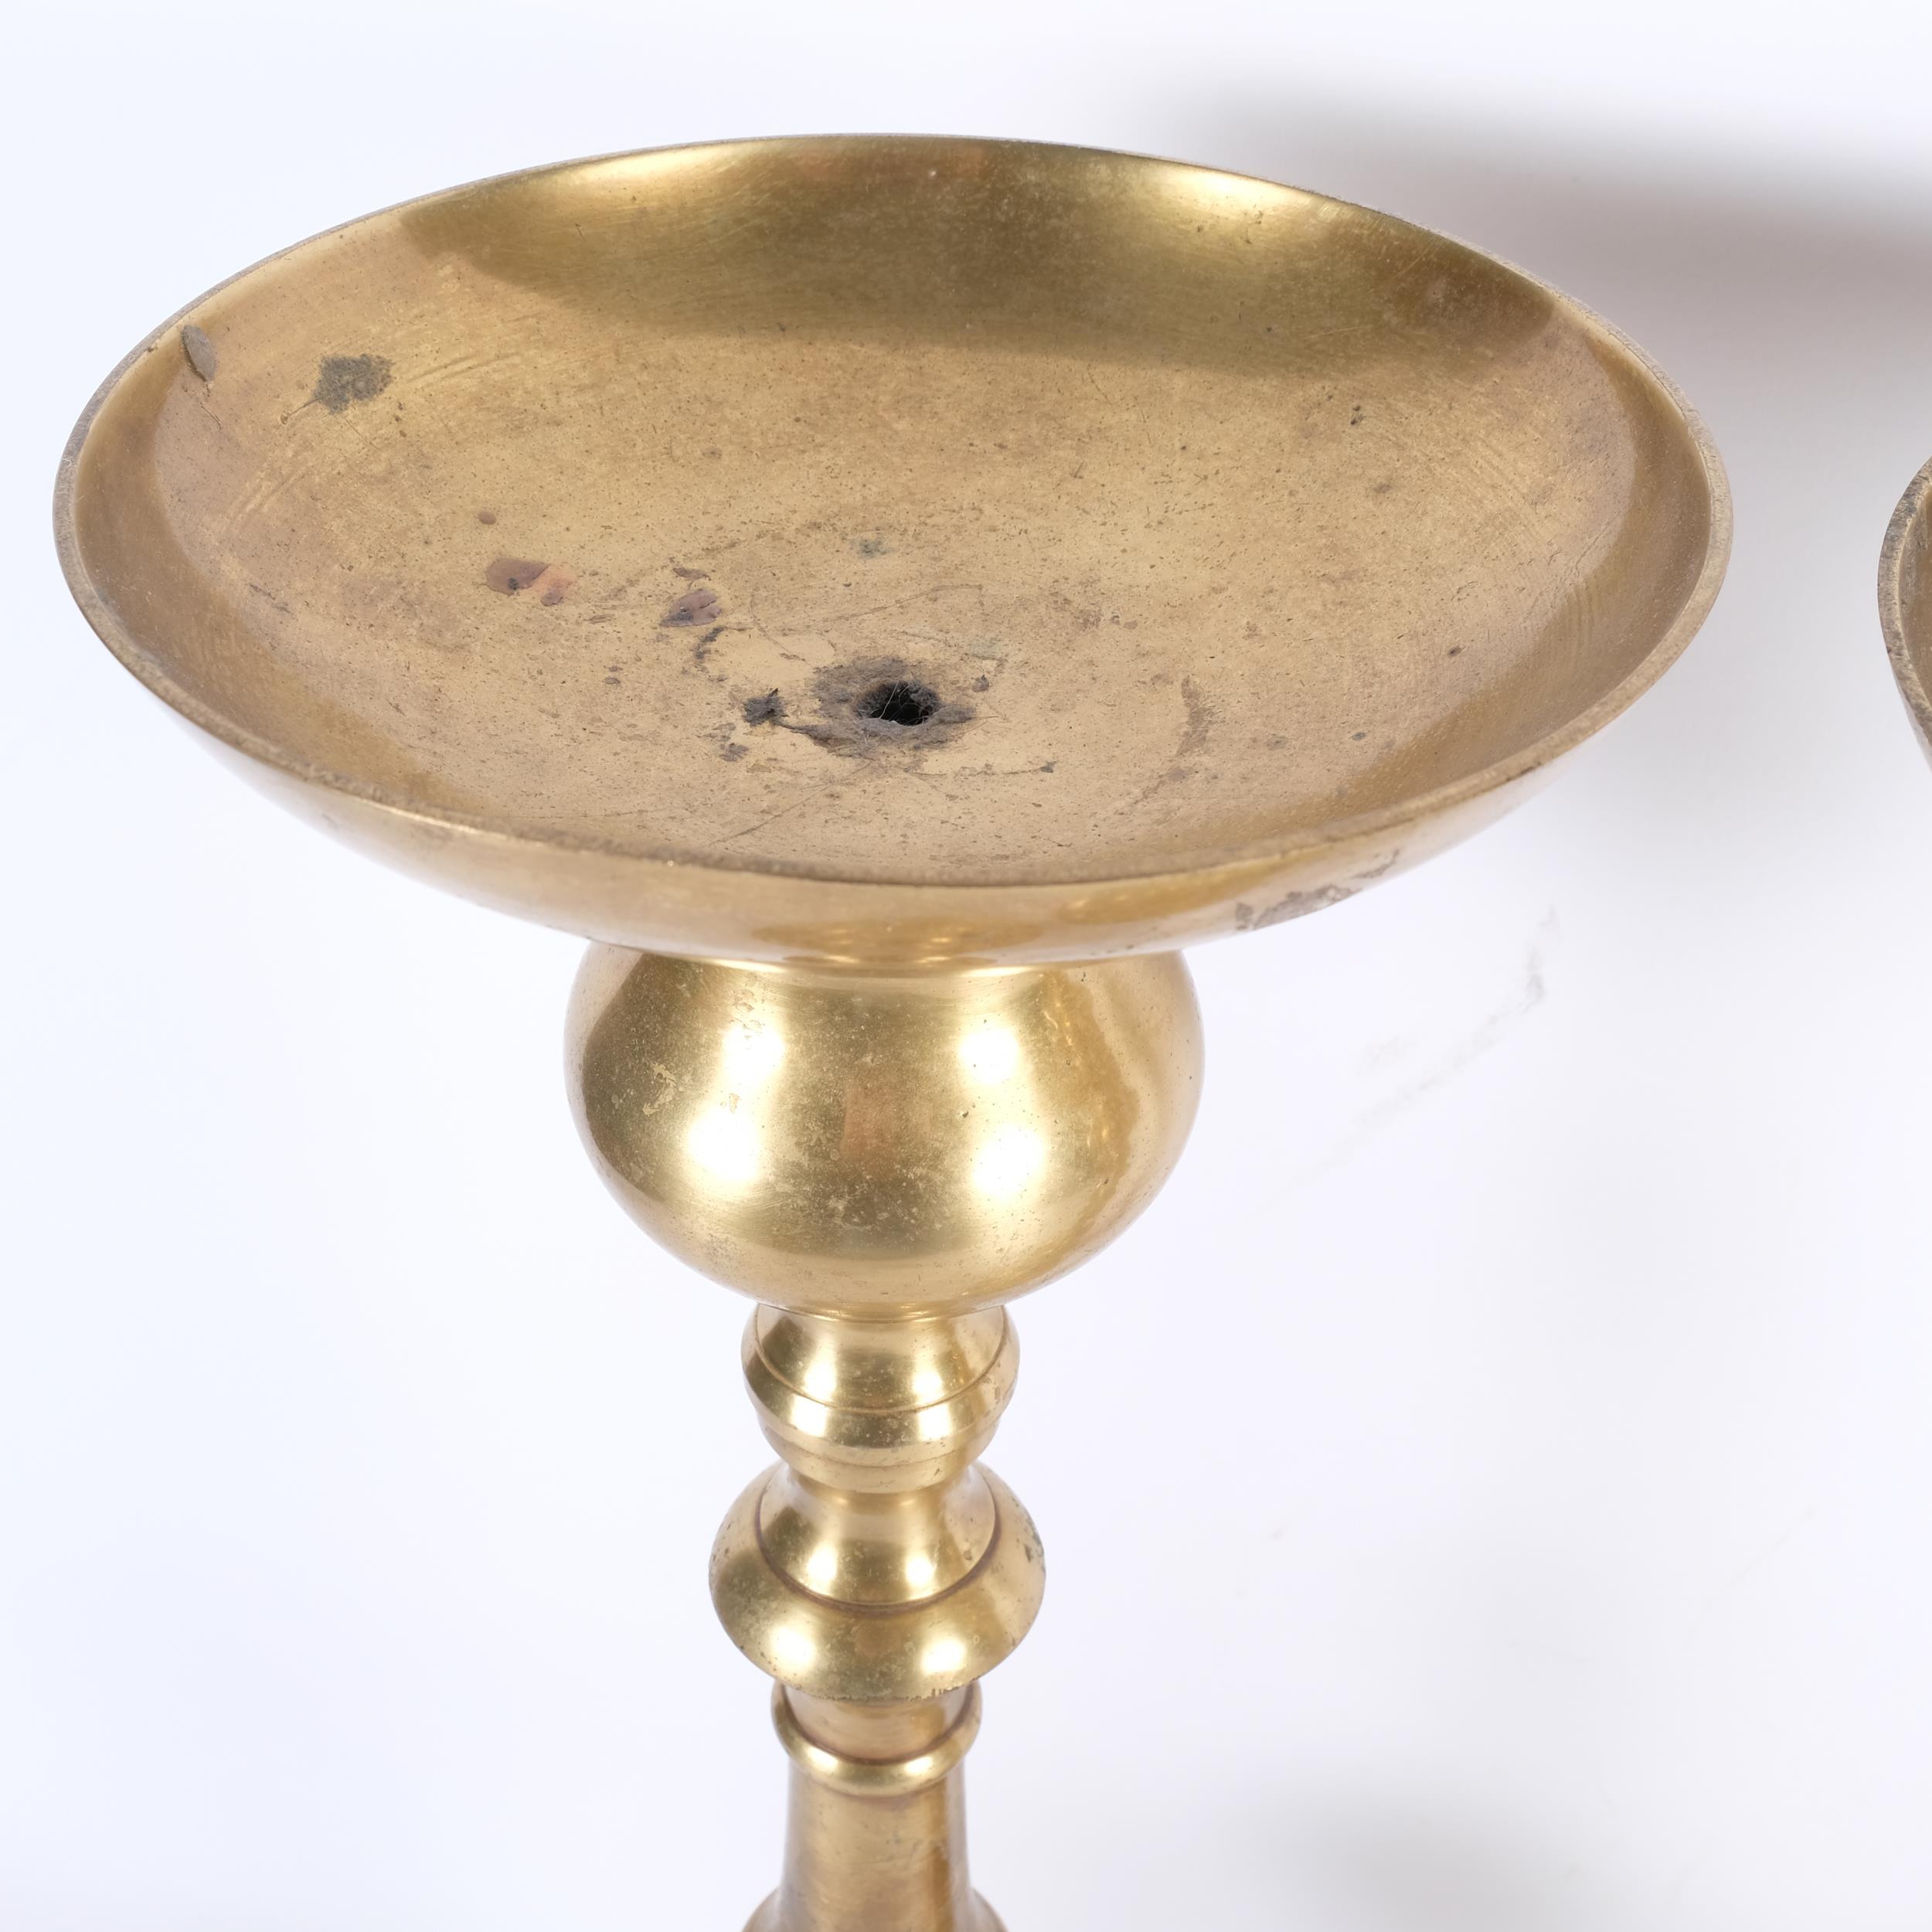 A set of 3 turned brass candle holders, H49.5cm - Image 2 of 2